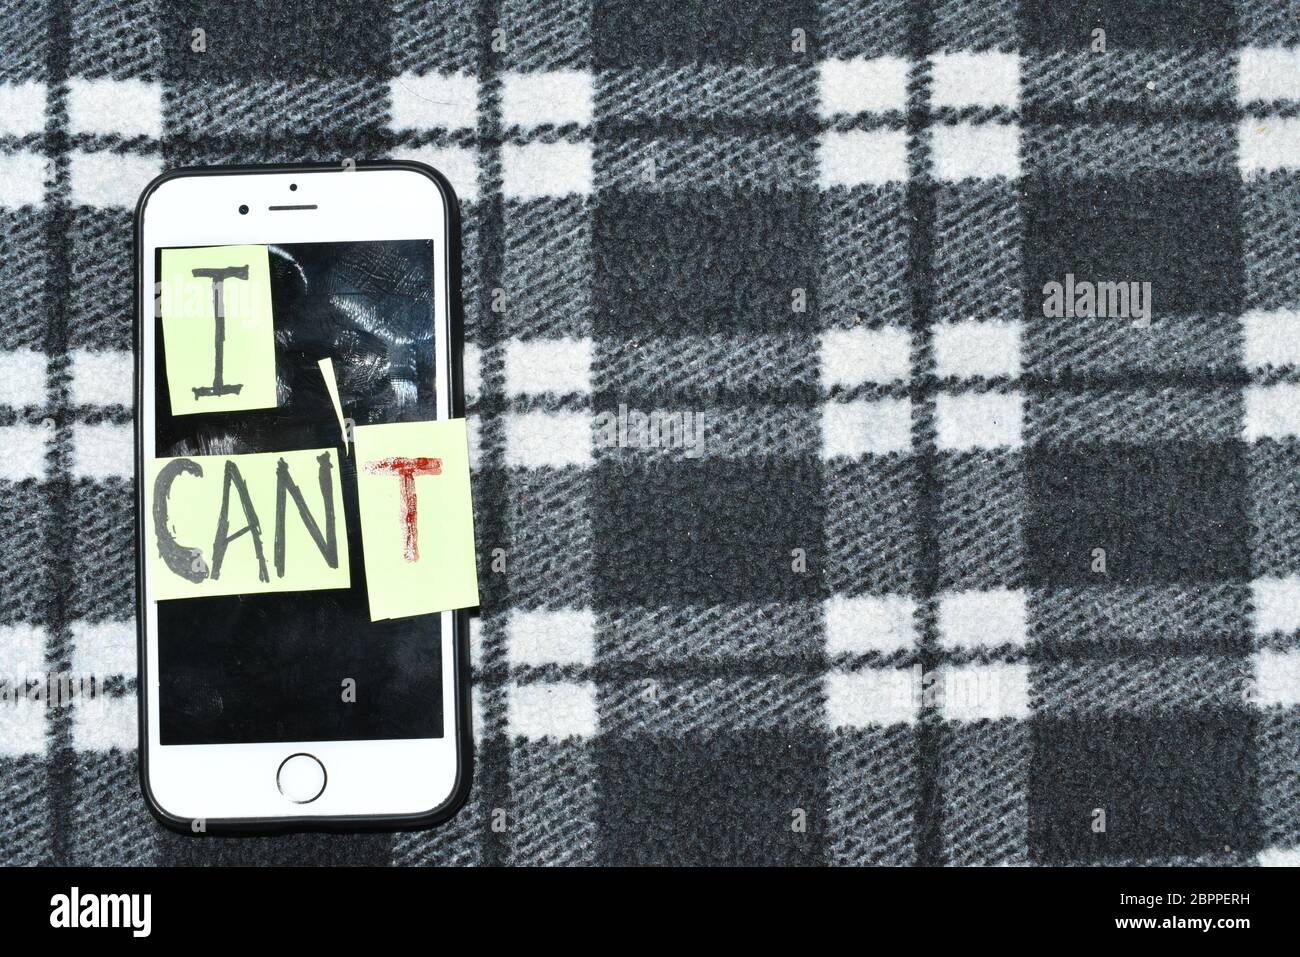 'I can' self motivation - cutting the letter 'T' of the written word I can't so it says I can, goal achievement, potential, overcoming.Mobile in the b Stock Photo